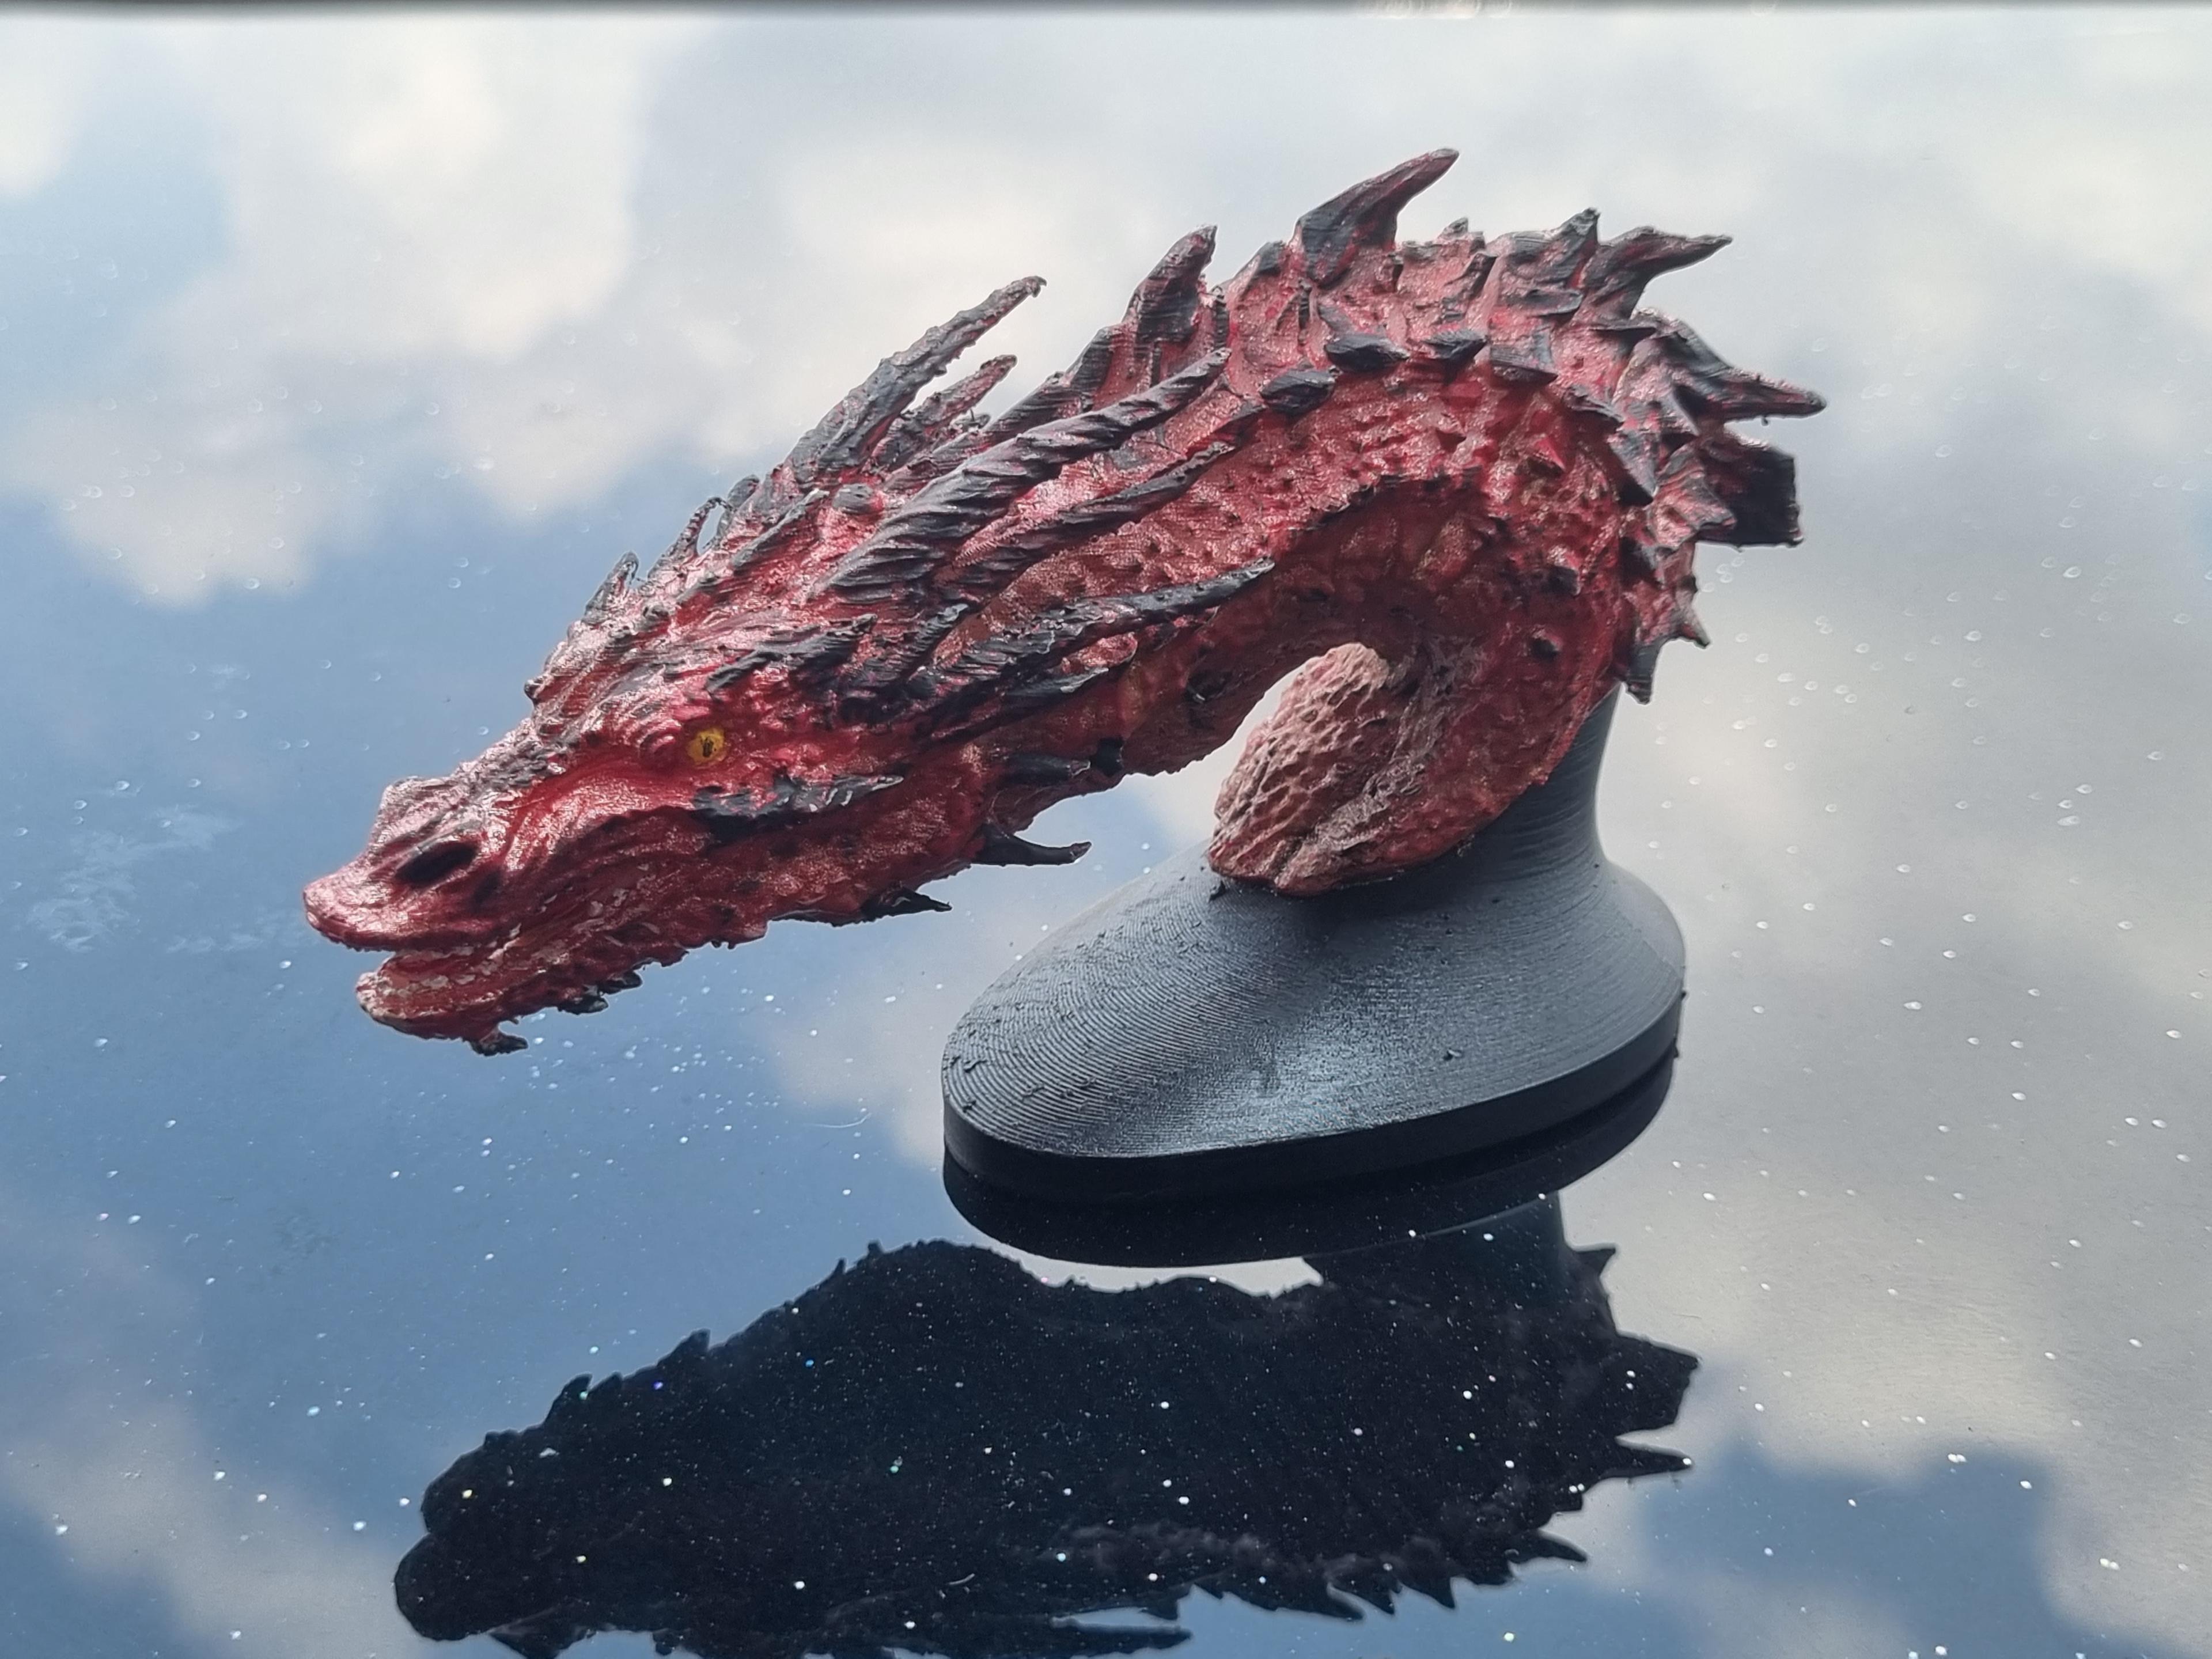 Smaug - The Hobbit - Lord of the Rings - Fan Art - Printed at around 11cm length on Ender 3 Max Neo with 0.12mm layer height - 3d model